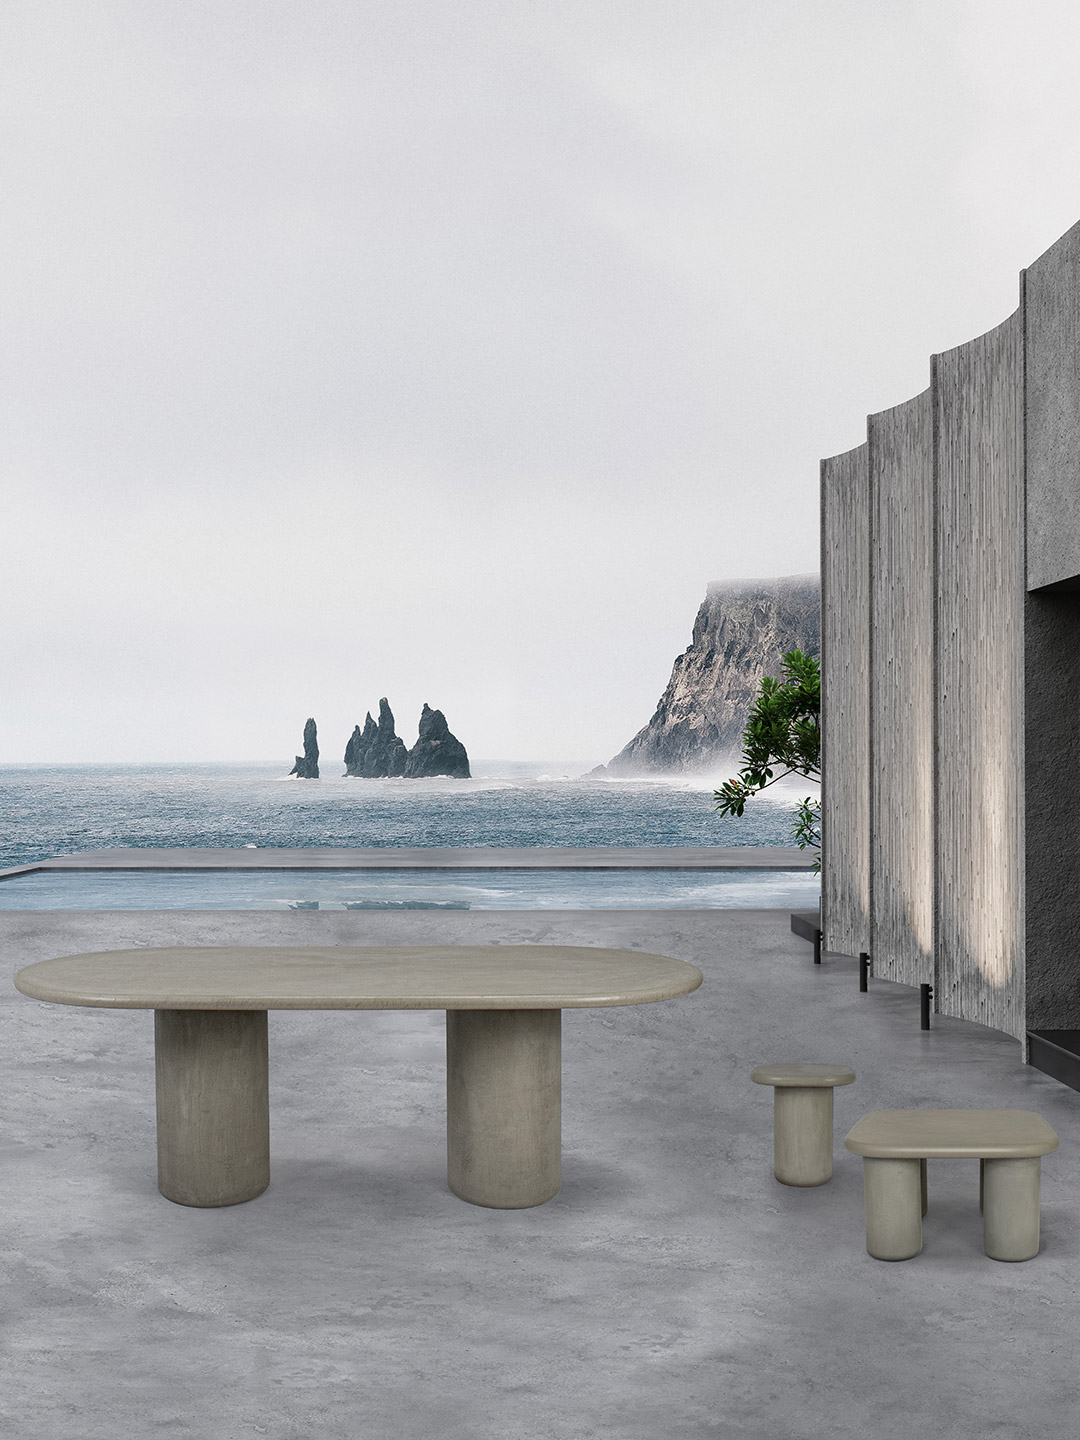 Muundo table collection inspired by nature with Haaki Collection dining table and coffee tables outside with an ocean behind